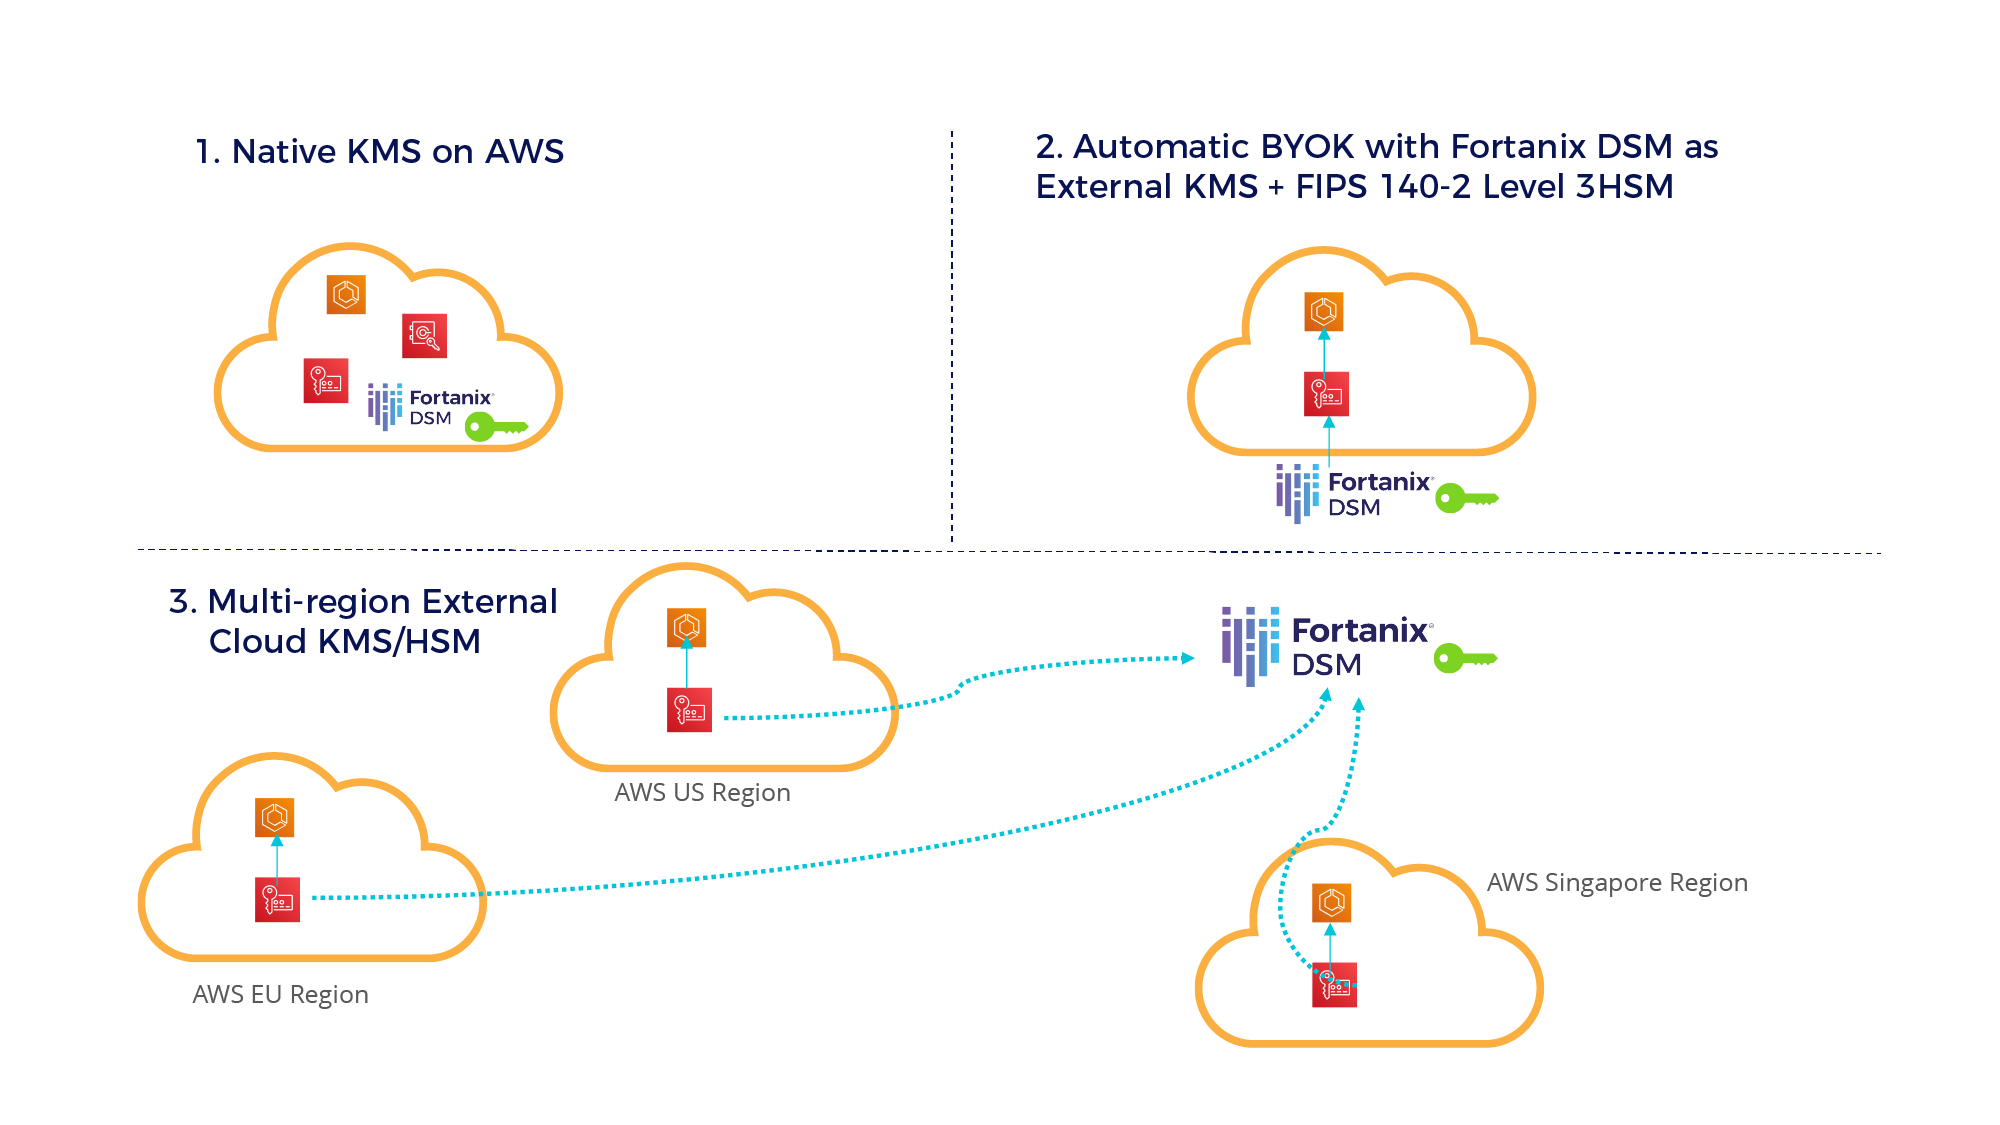 fortanix dsm use cases for aws